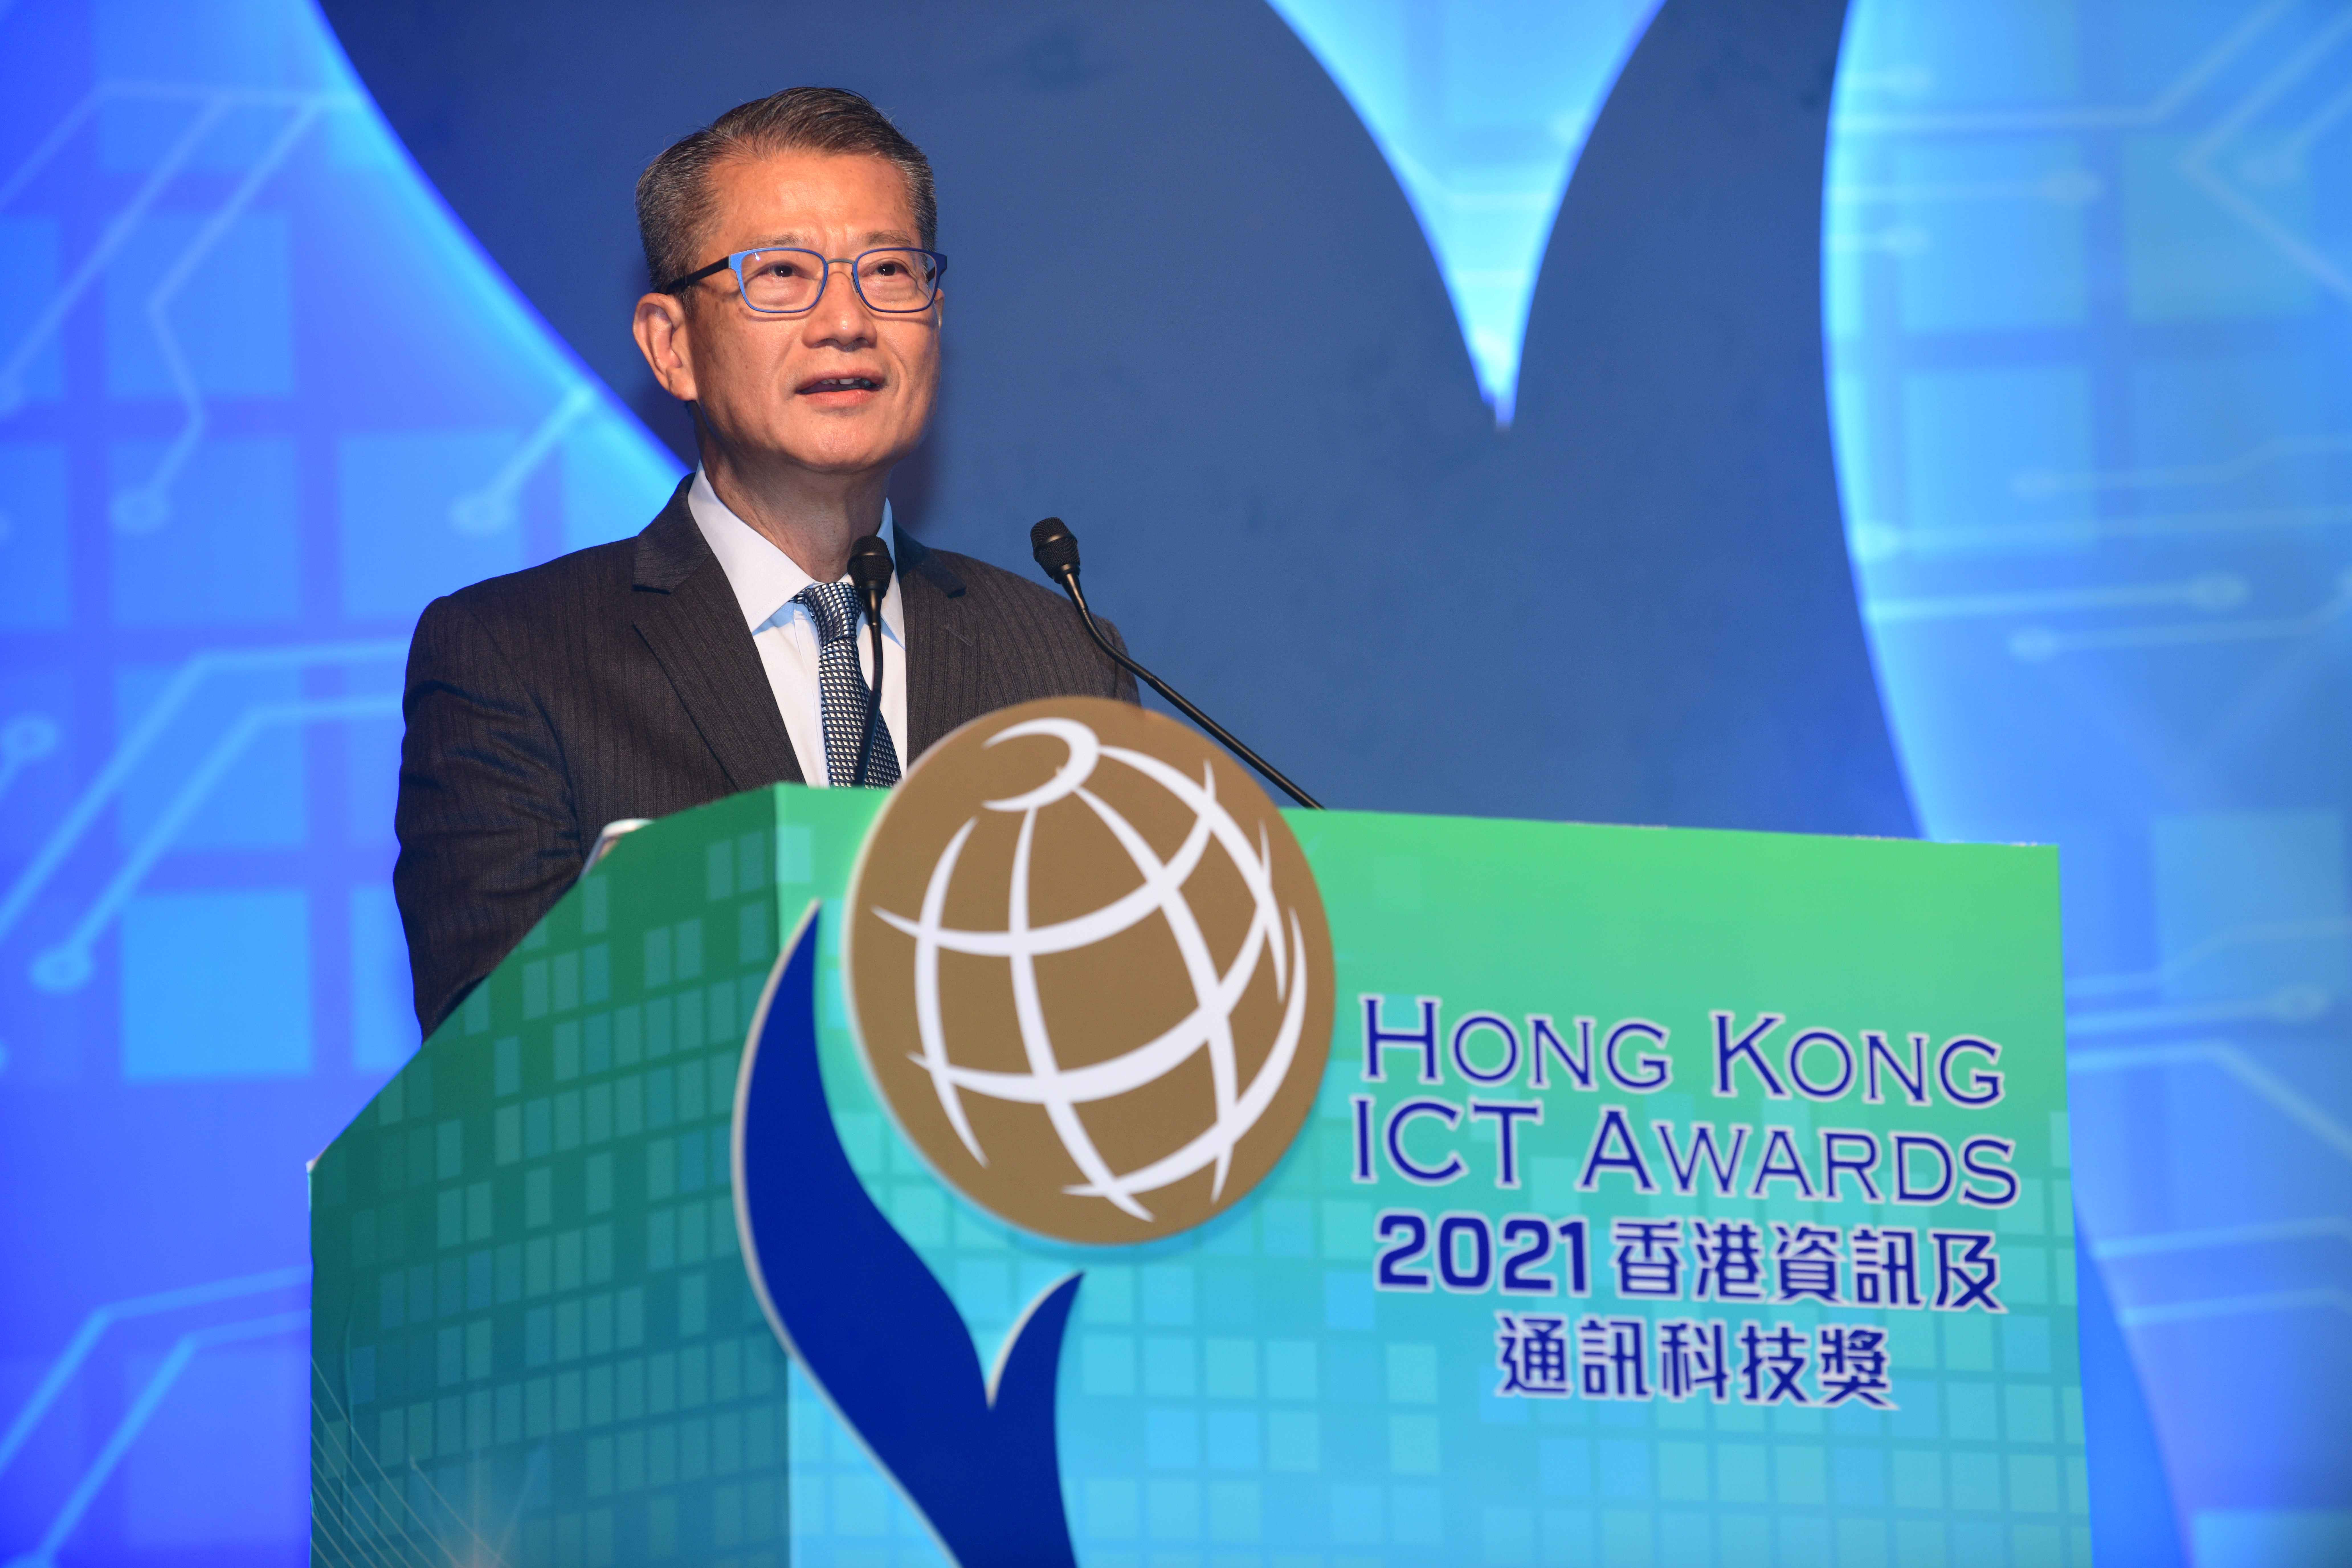 Hong Kong ICT Awards 2021 Awards Presentation Ceremony, Opening Remarks by Guest of Honour